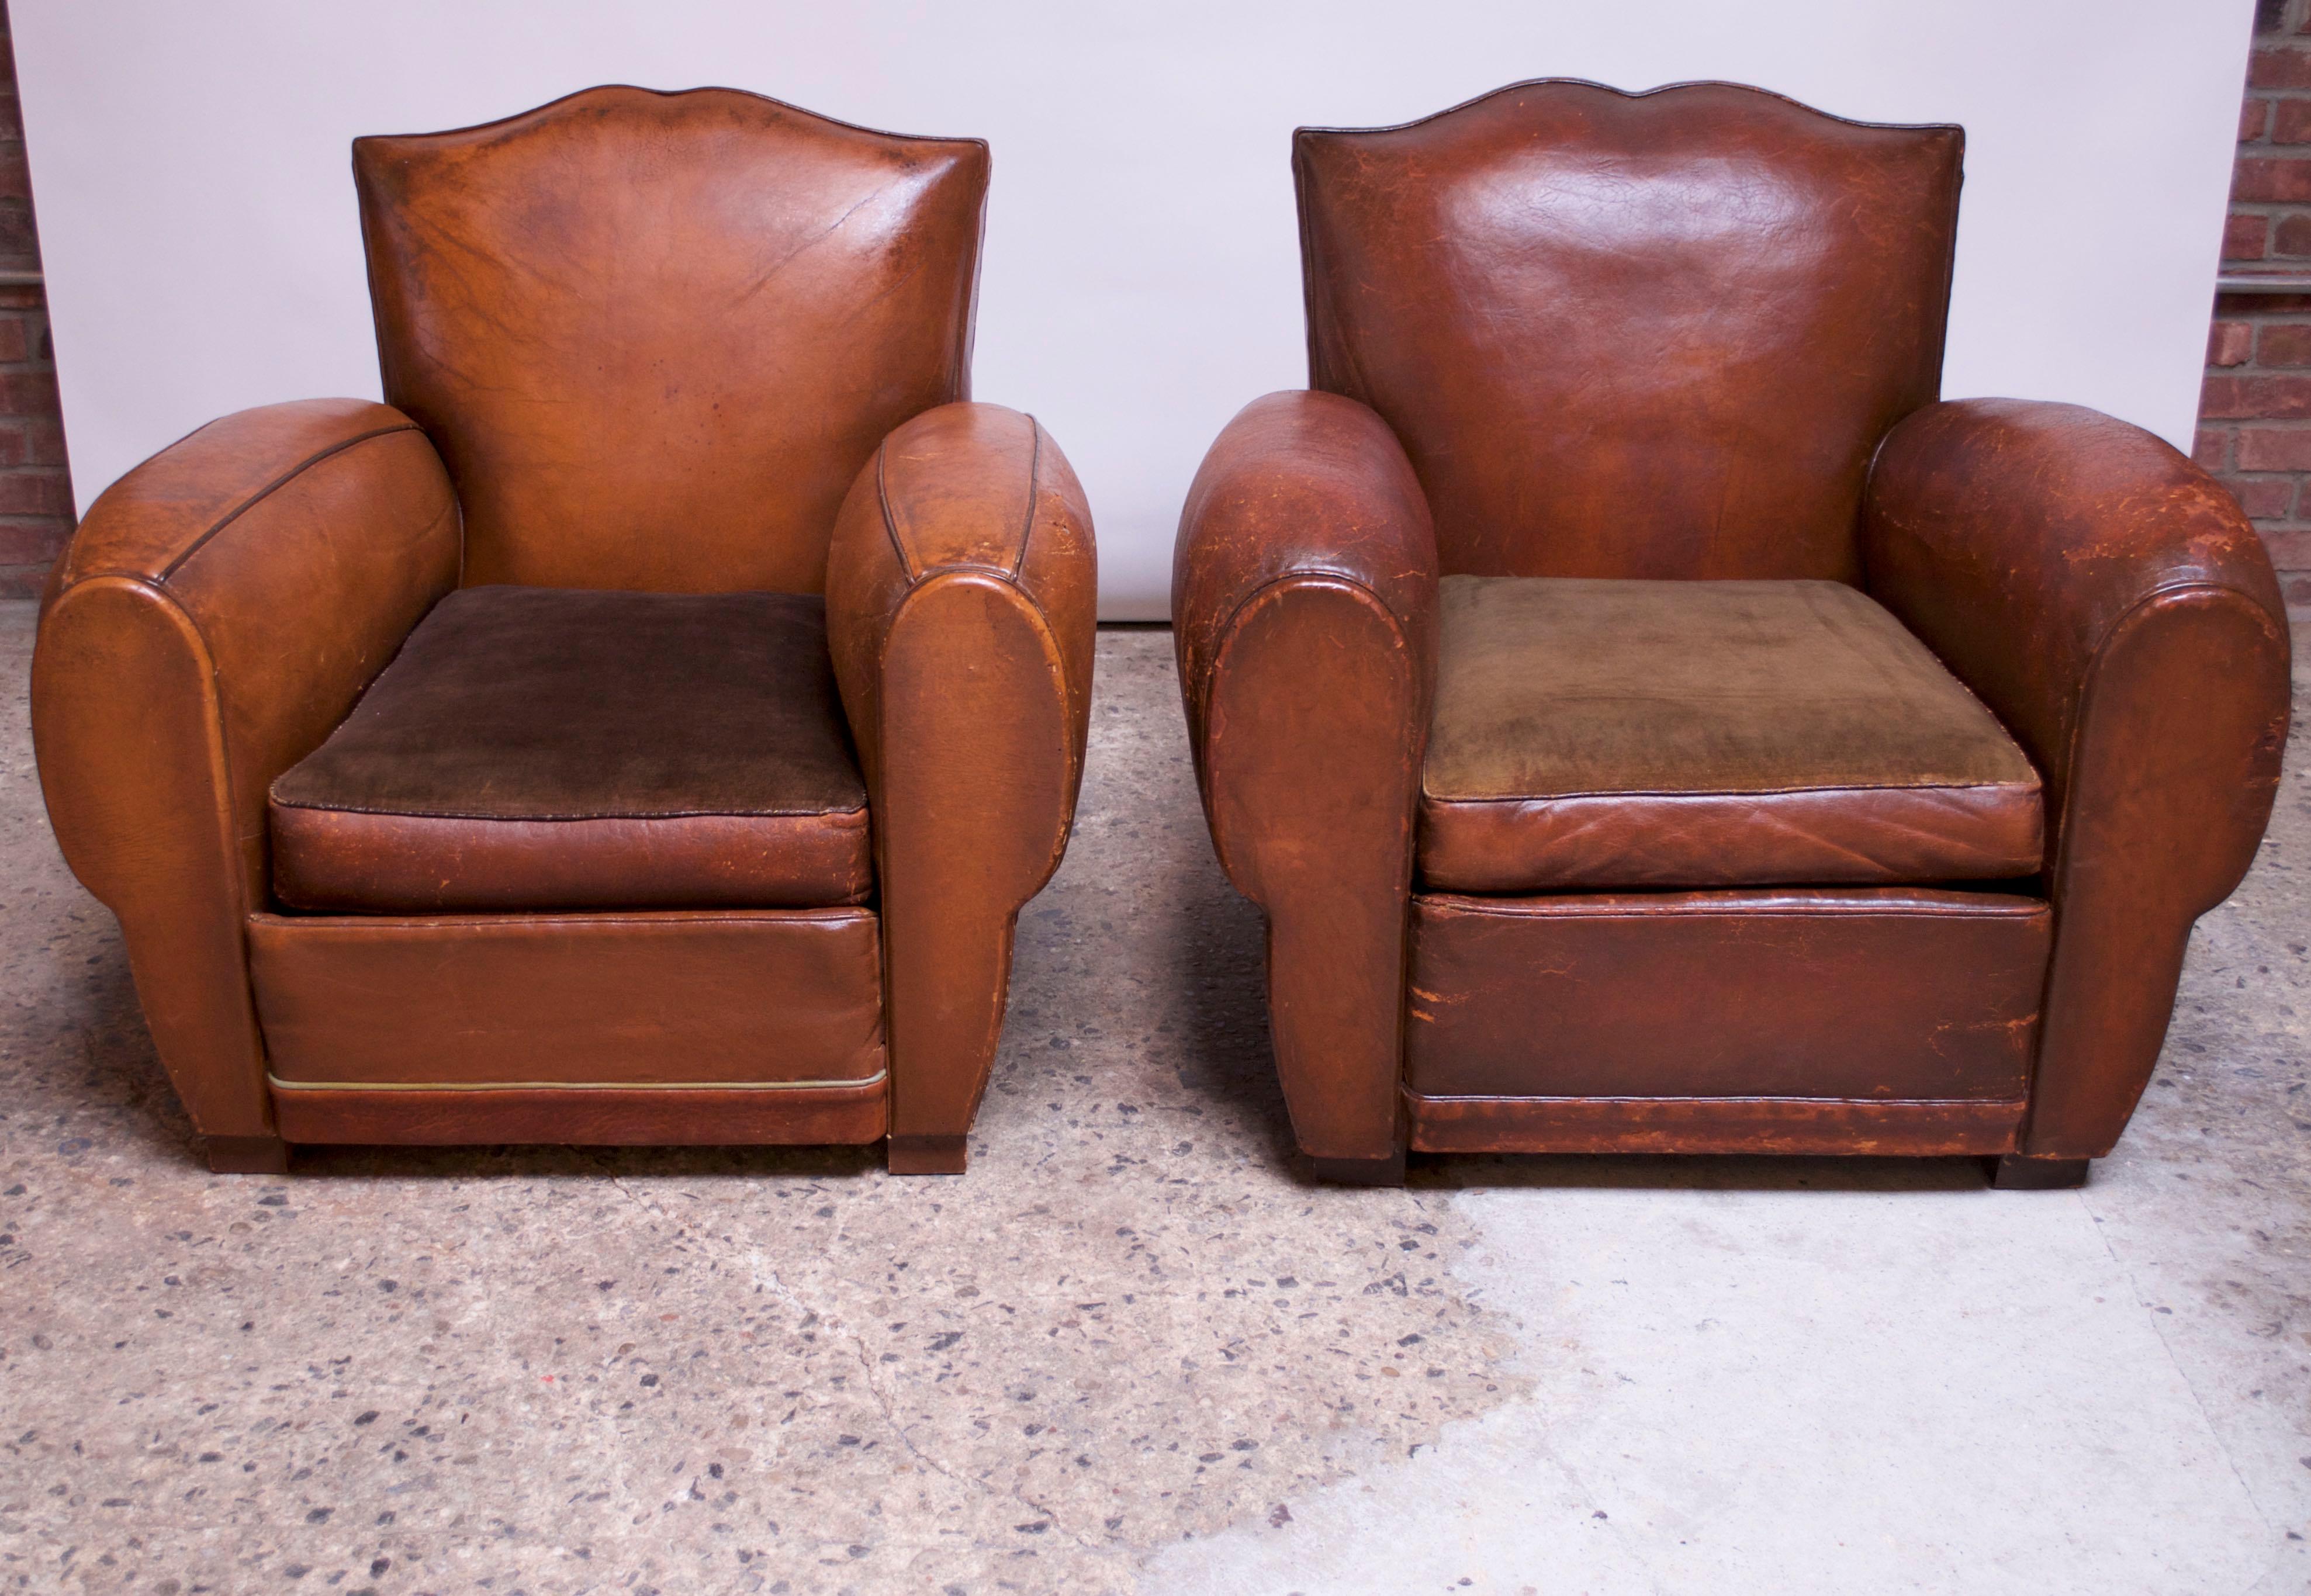 Circa 1930s French club chairs with 'mustache' backs, originally sold as 'his and hers,' given the slight aesthetic and proportional differences (the chair with the seamed arms is slightly smaller, the leather differs in color, and the stud or